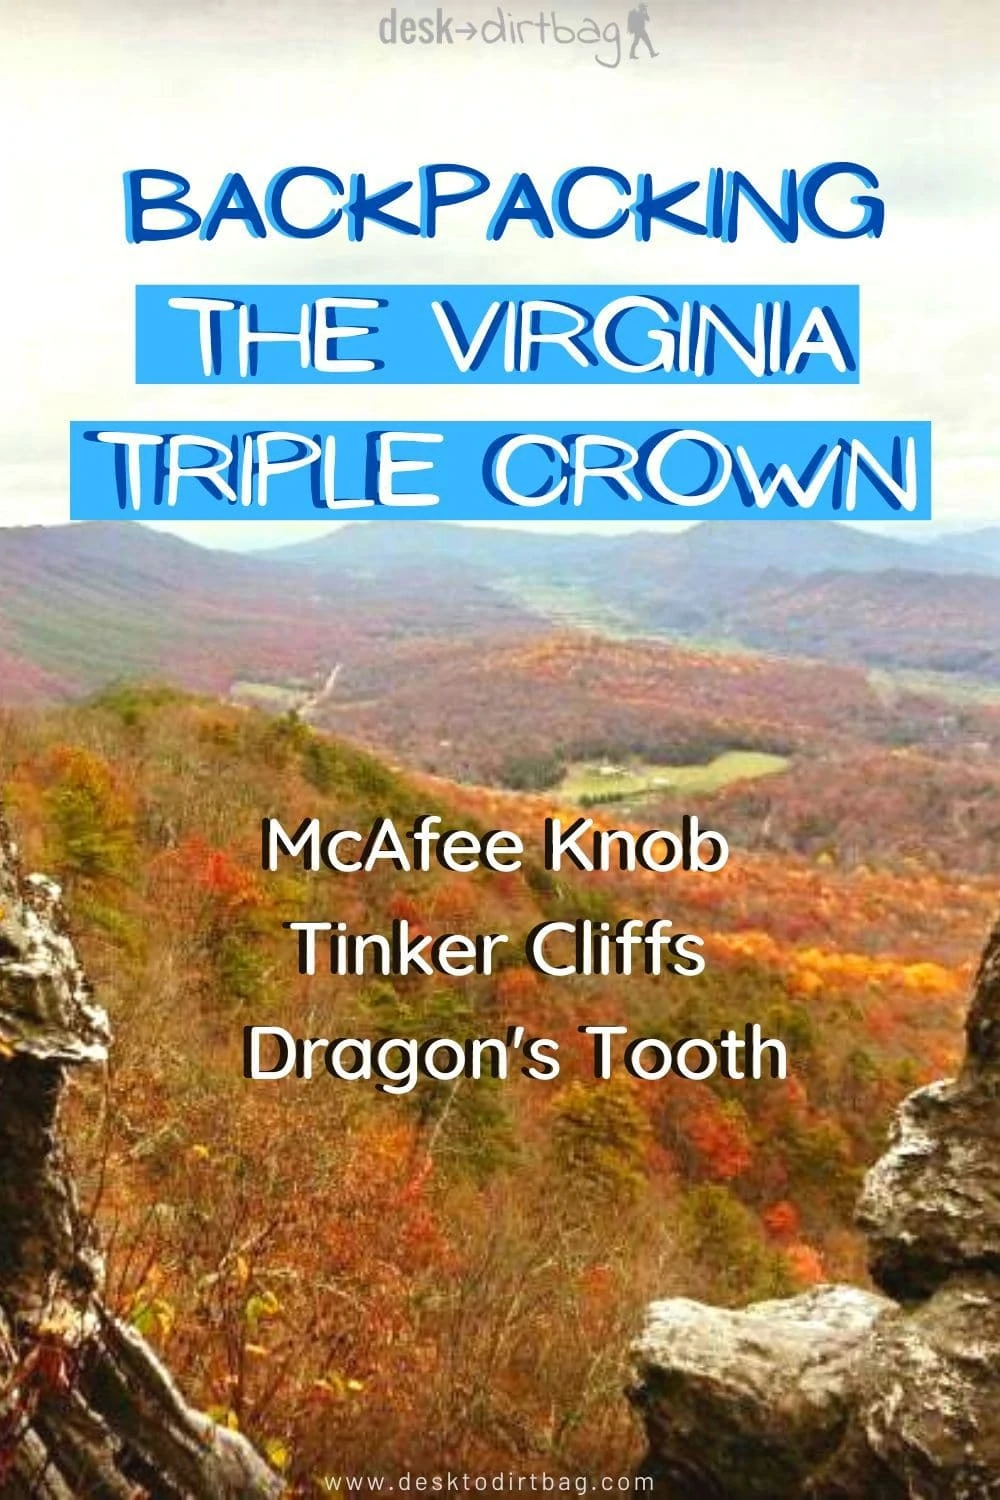 Backpacking the Virginia Triple Crown: McAfee Knob, Tinker Cliffs, and Dragon's Tooth trip-reports, backpacking